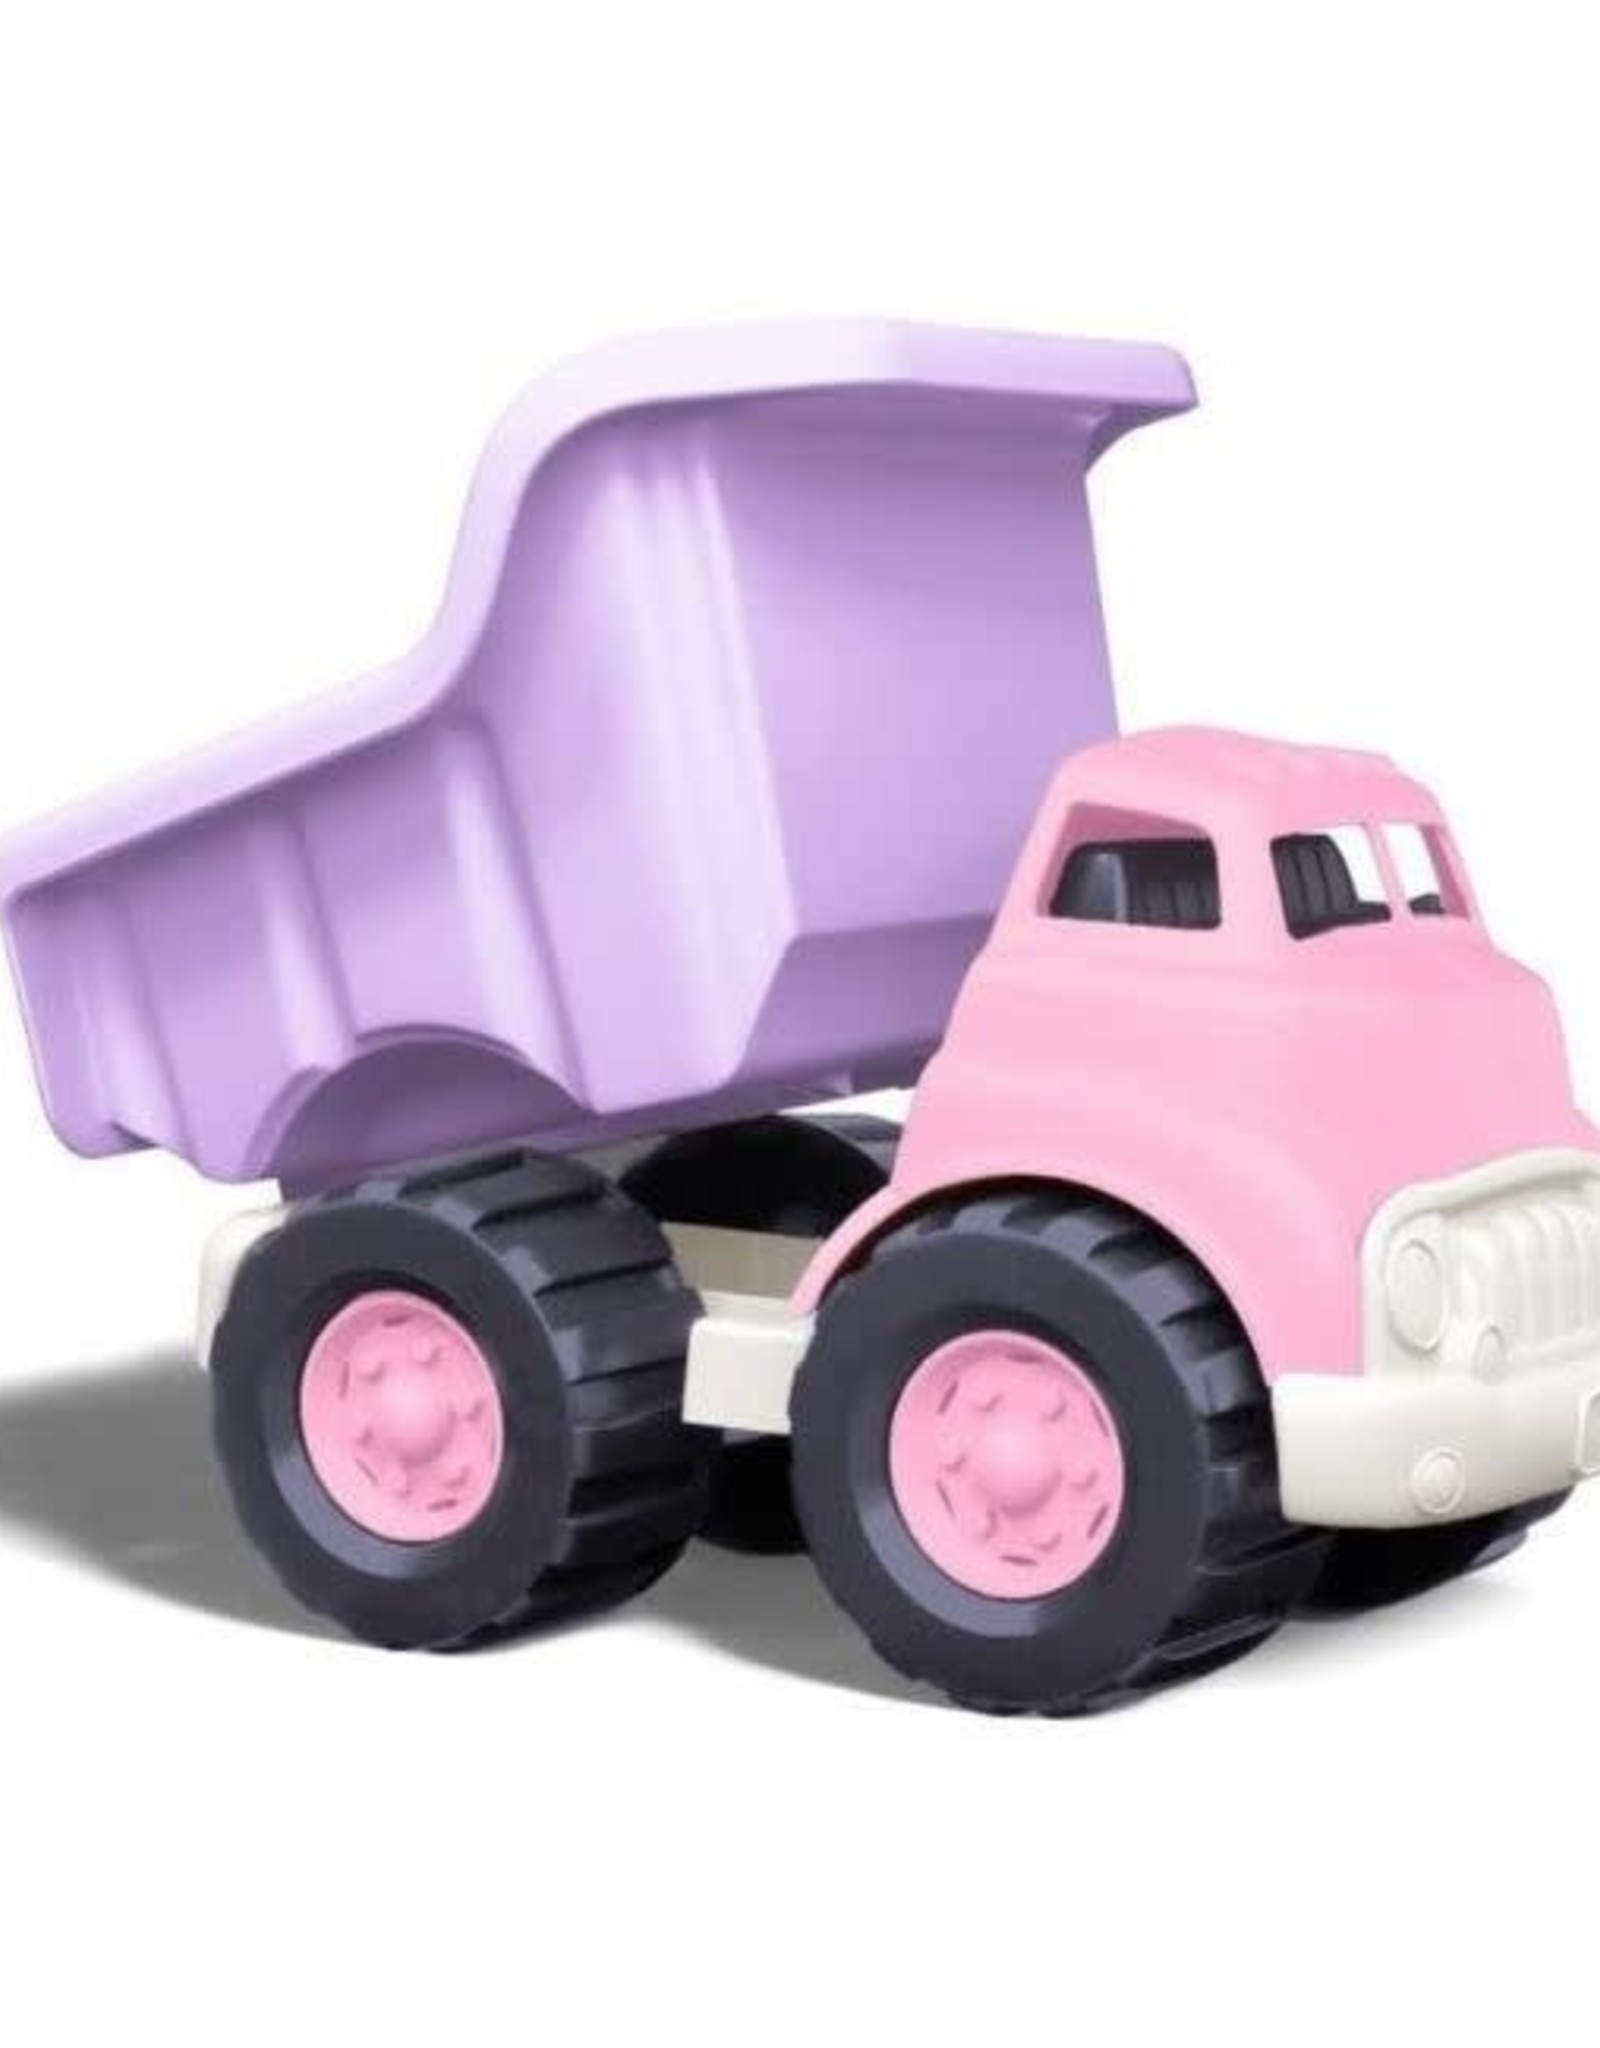 Green Toys Green Toy Dump Truck - Pink